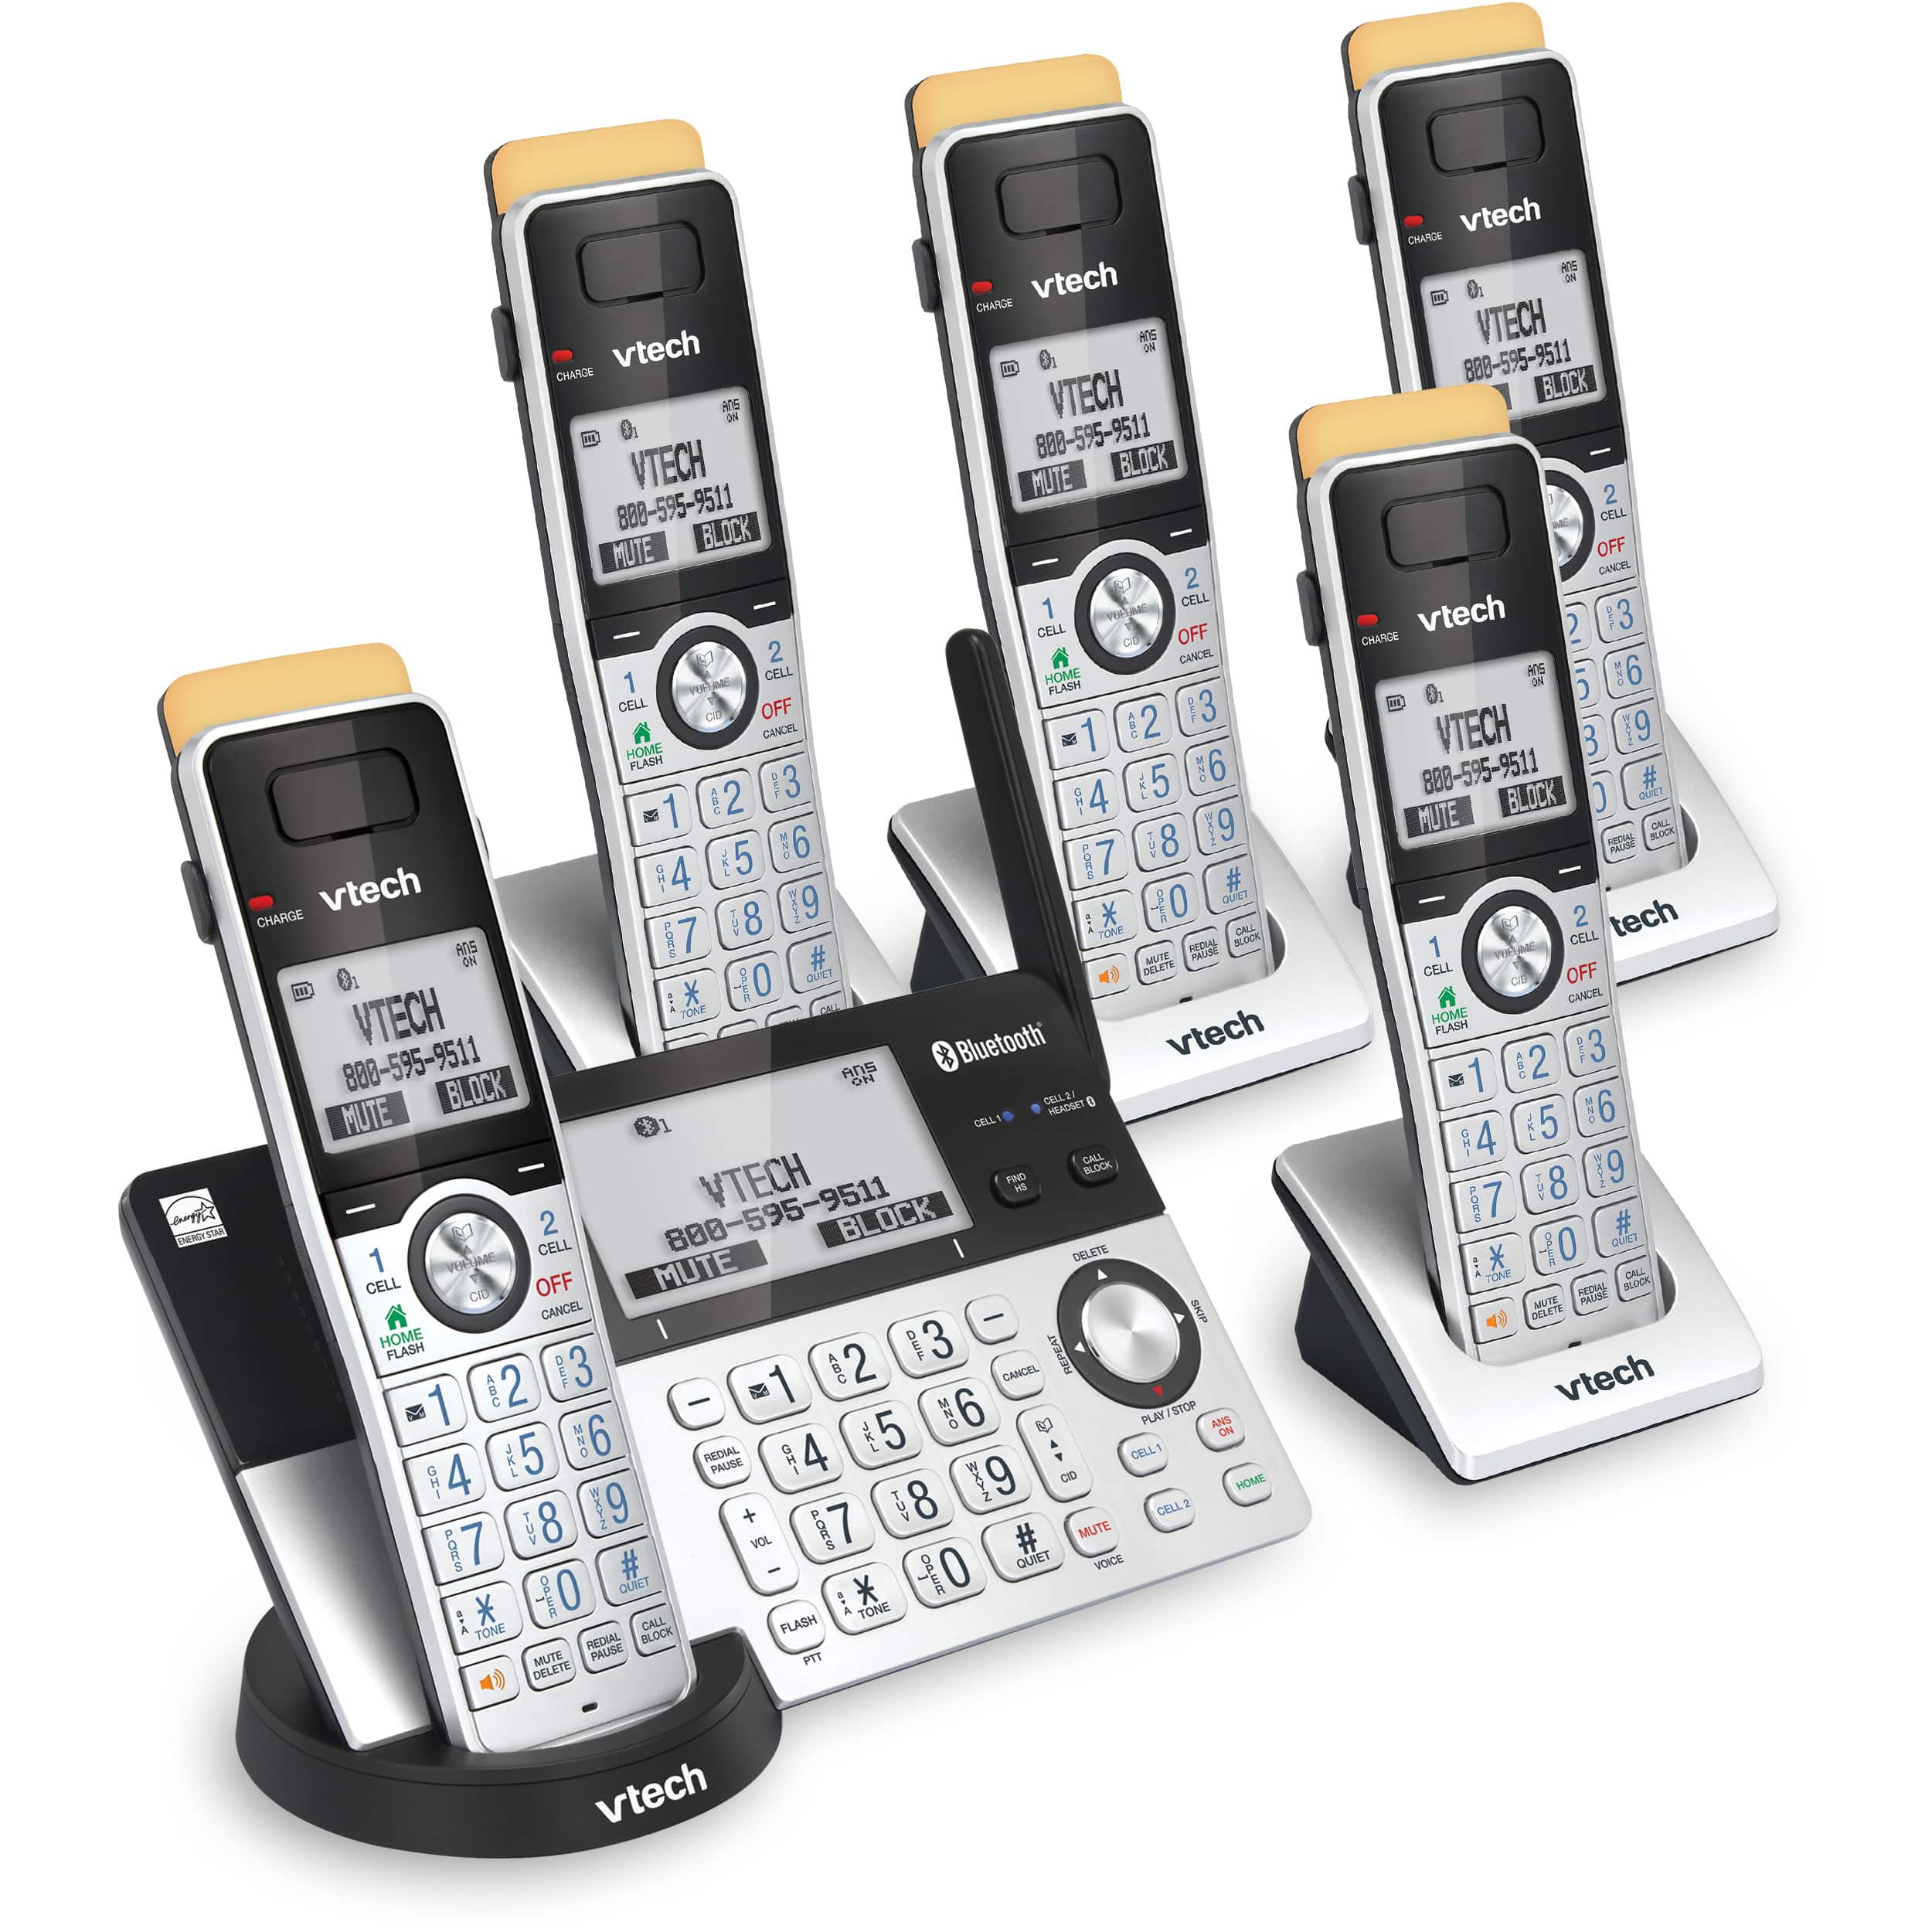 5-Handset Expandable Cordless Phone with Super Long Range, Bluetooth Connect to Cell, Smart Call Blocker and Answering System, IS8151-5